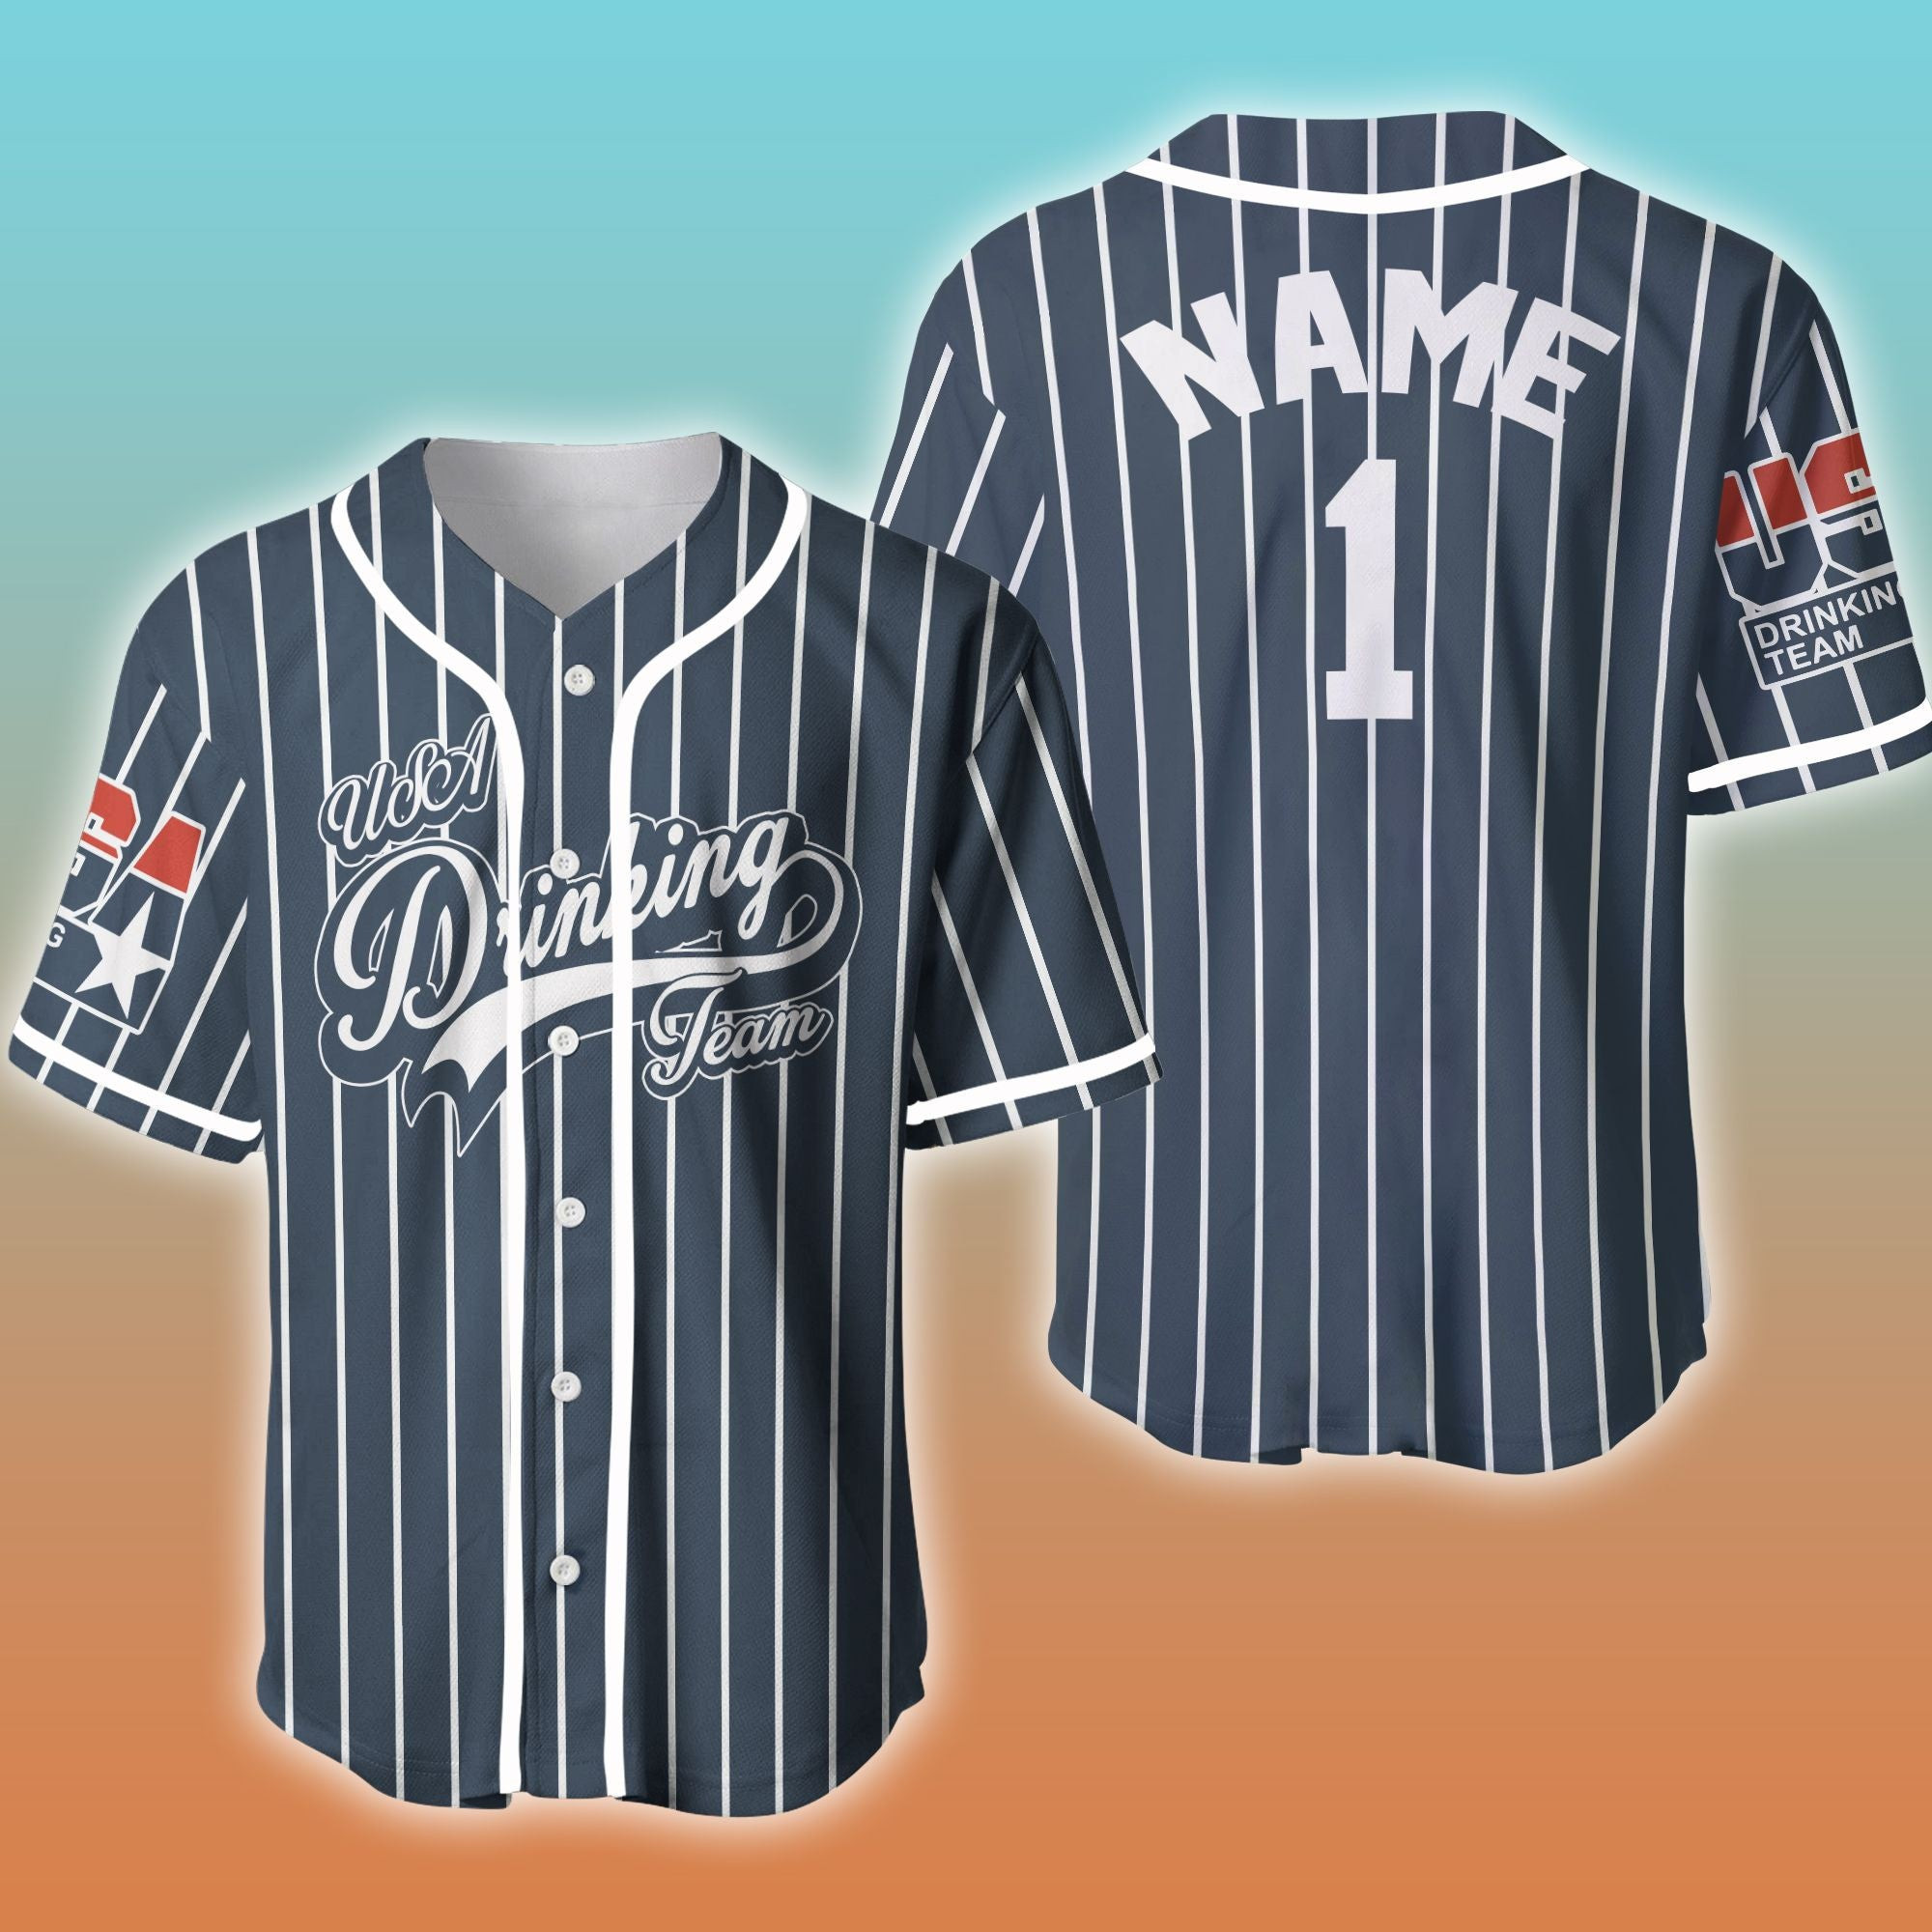 USA Drinking Team Personalized And Number Baseball Jersey, Unisex Jersey Shirt for Men Women